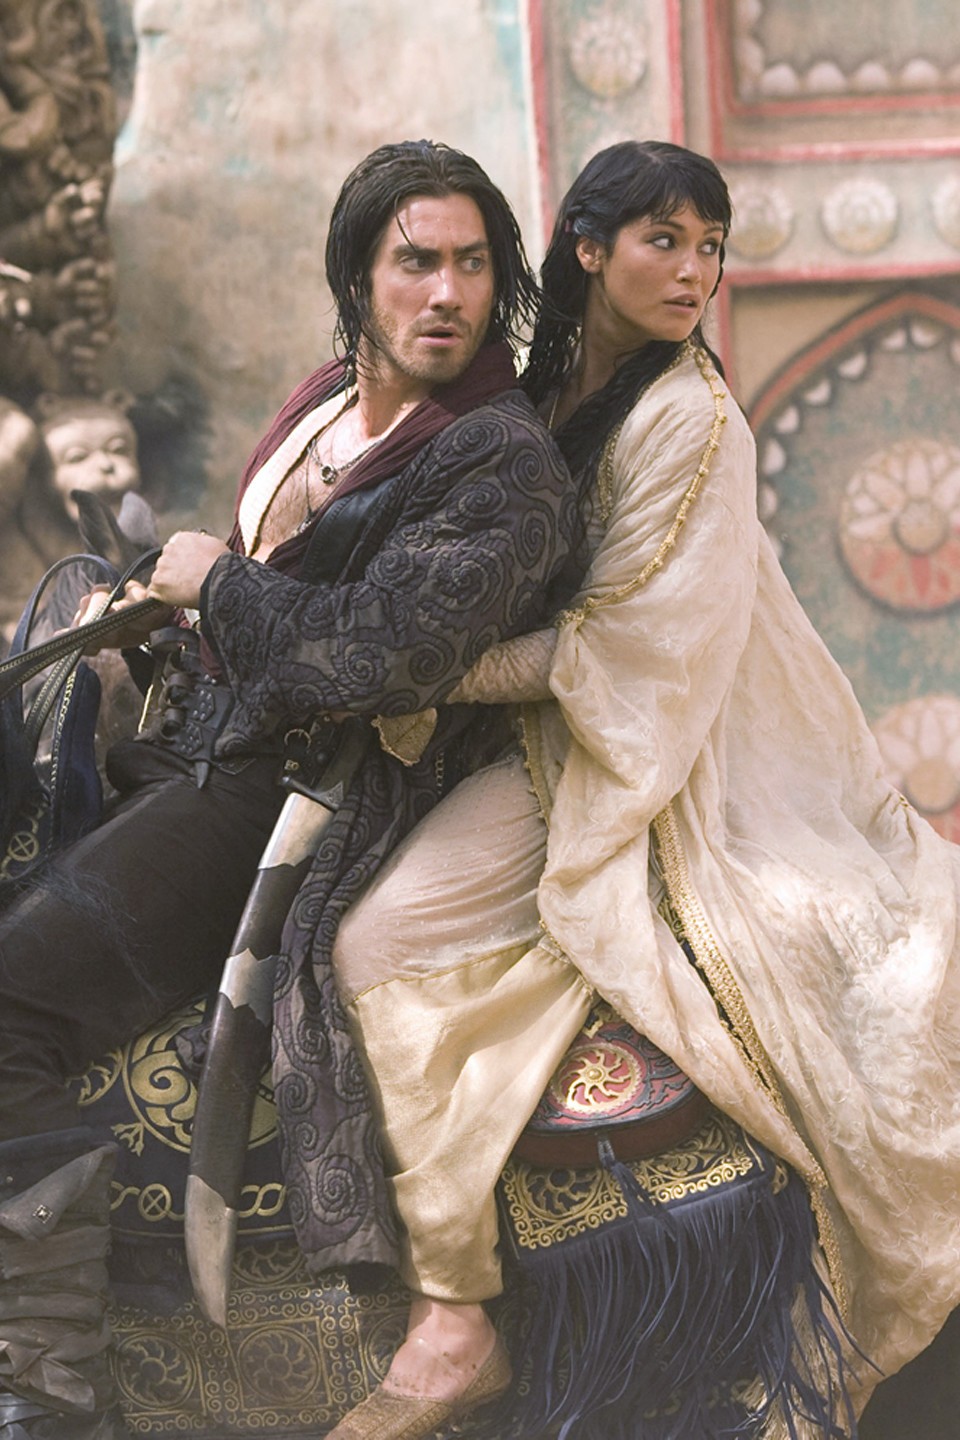 Prince of Persia: The Sands of Time Showtimes